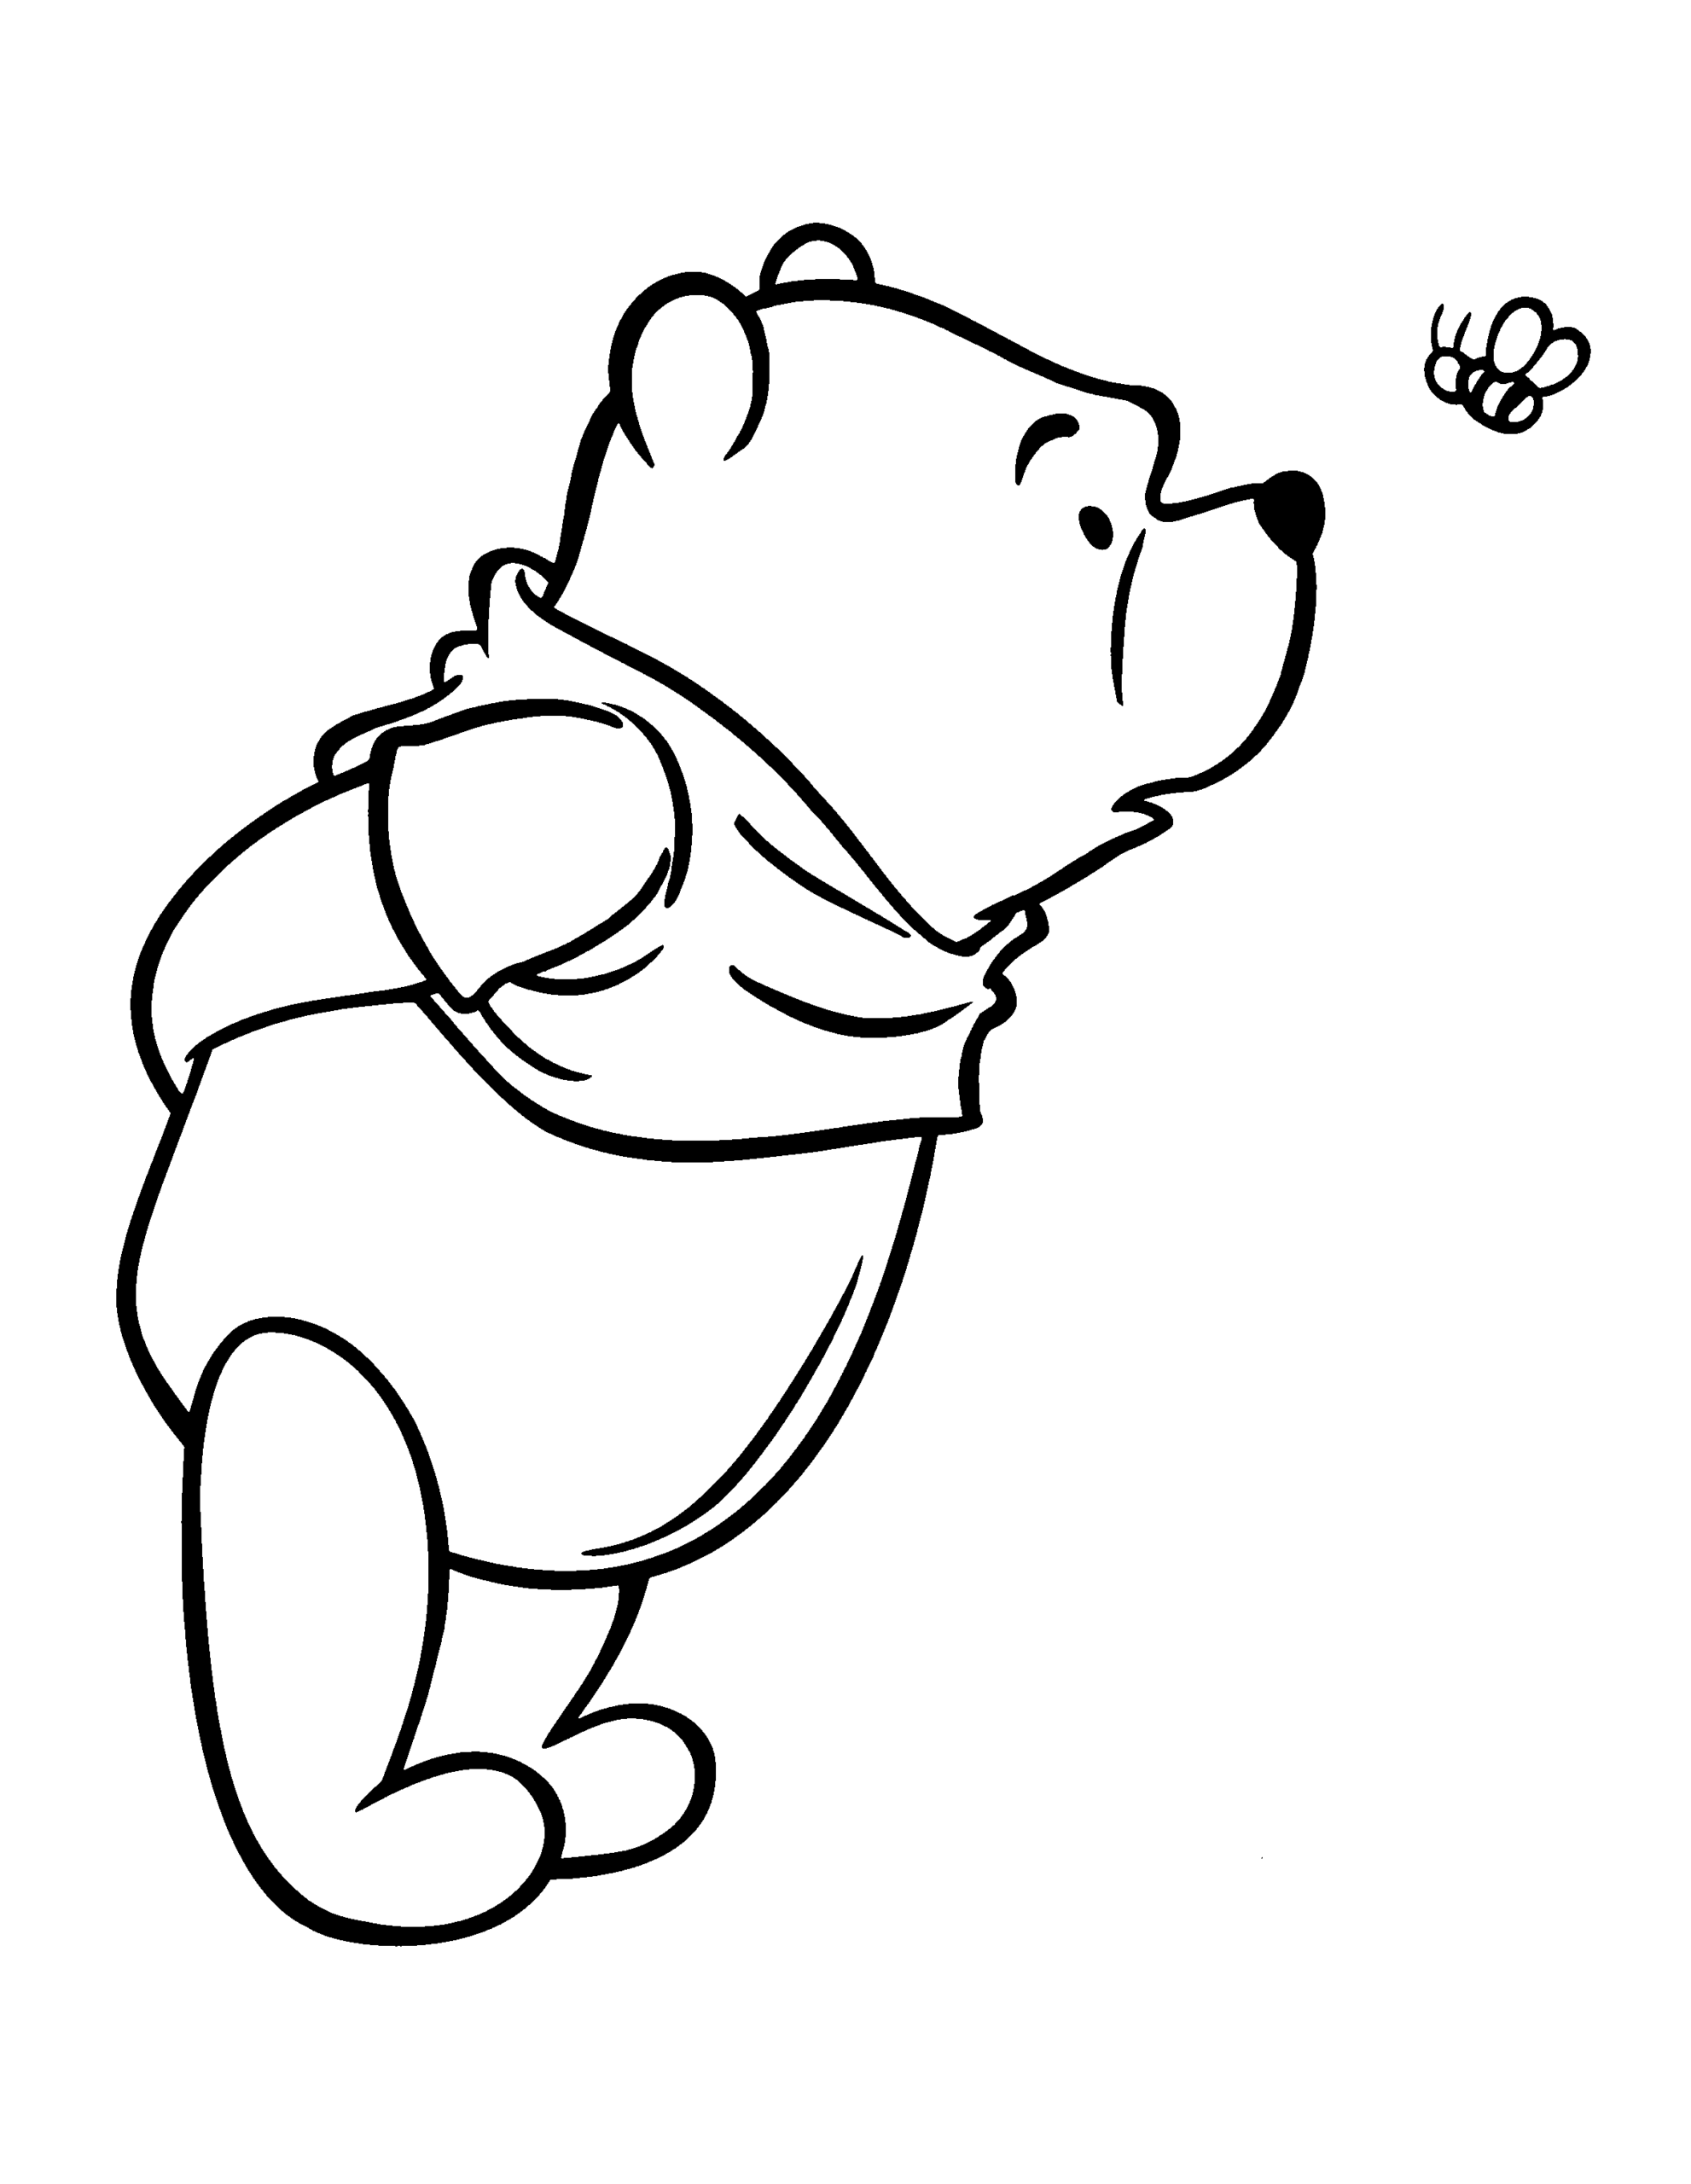 Winnie the Pooh Coloring Pages Cartoons winnie the pooh 111 Printable 2020 7091 Coloring4free